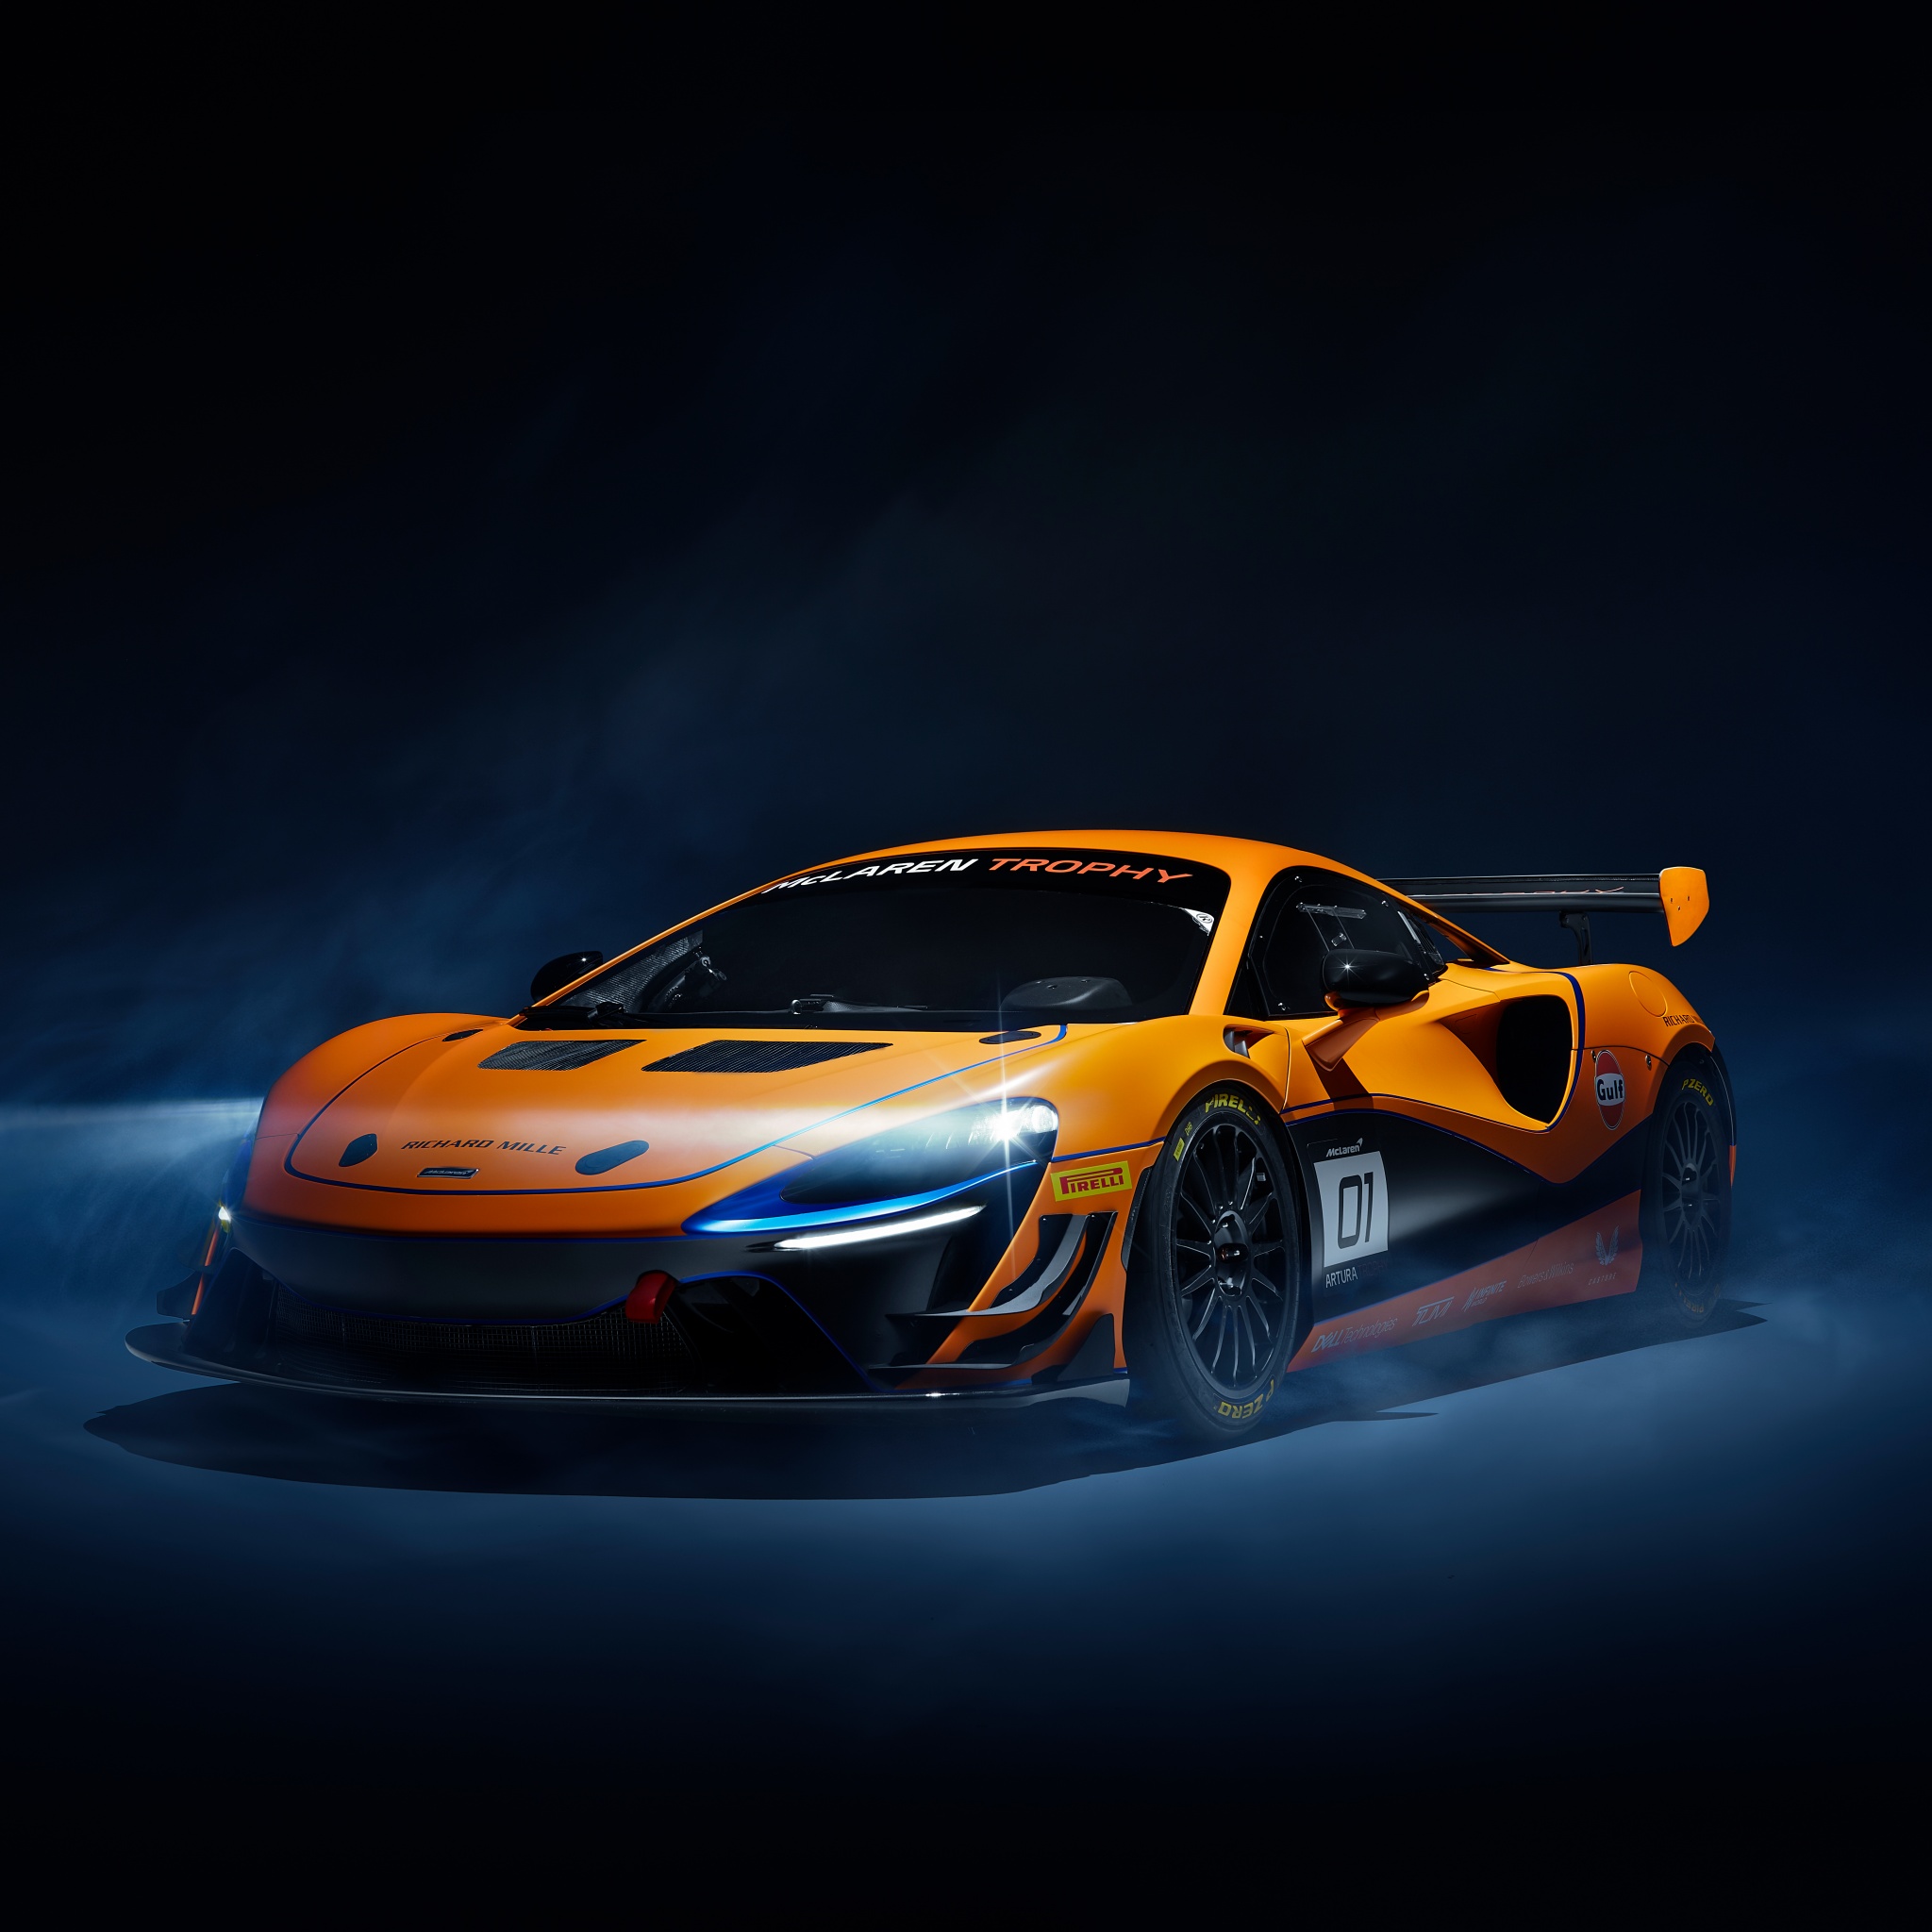 Race Car in Night City Wallpaper  Supercar Wallpaper for iPhone